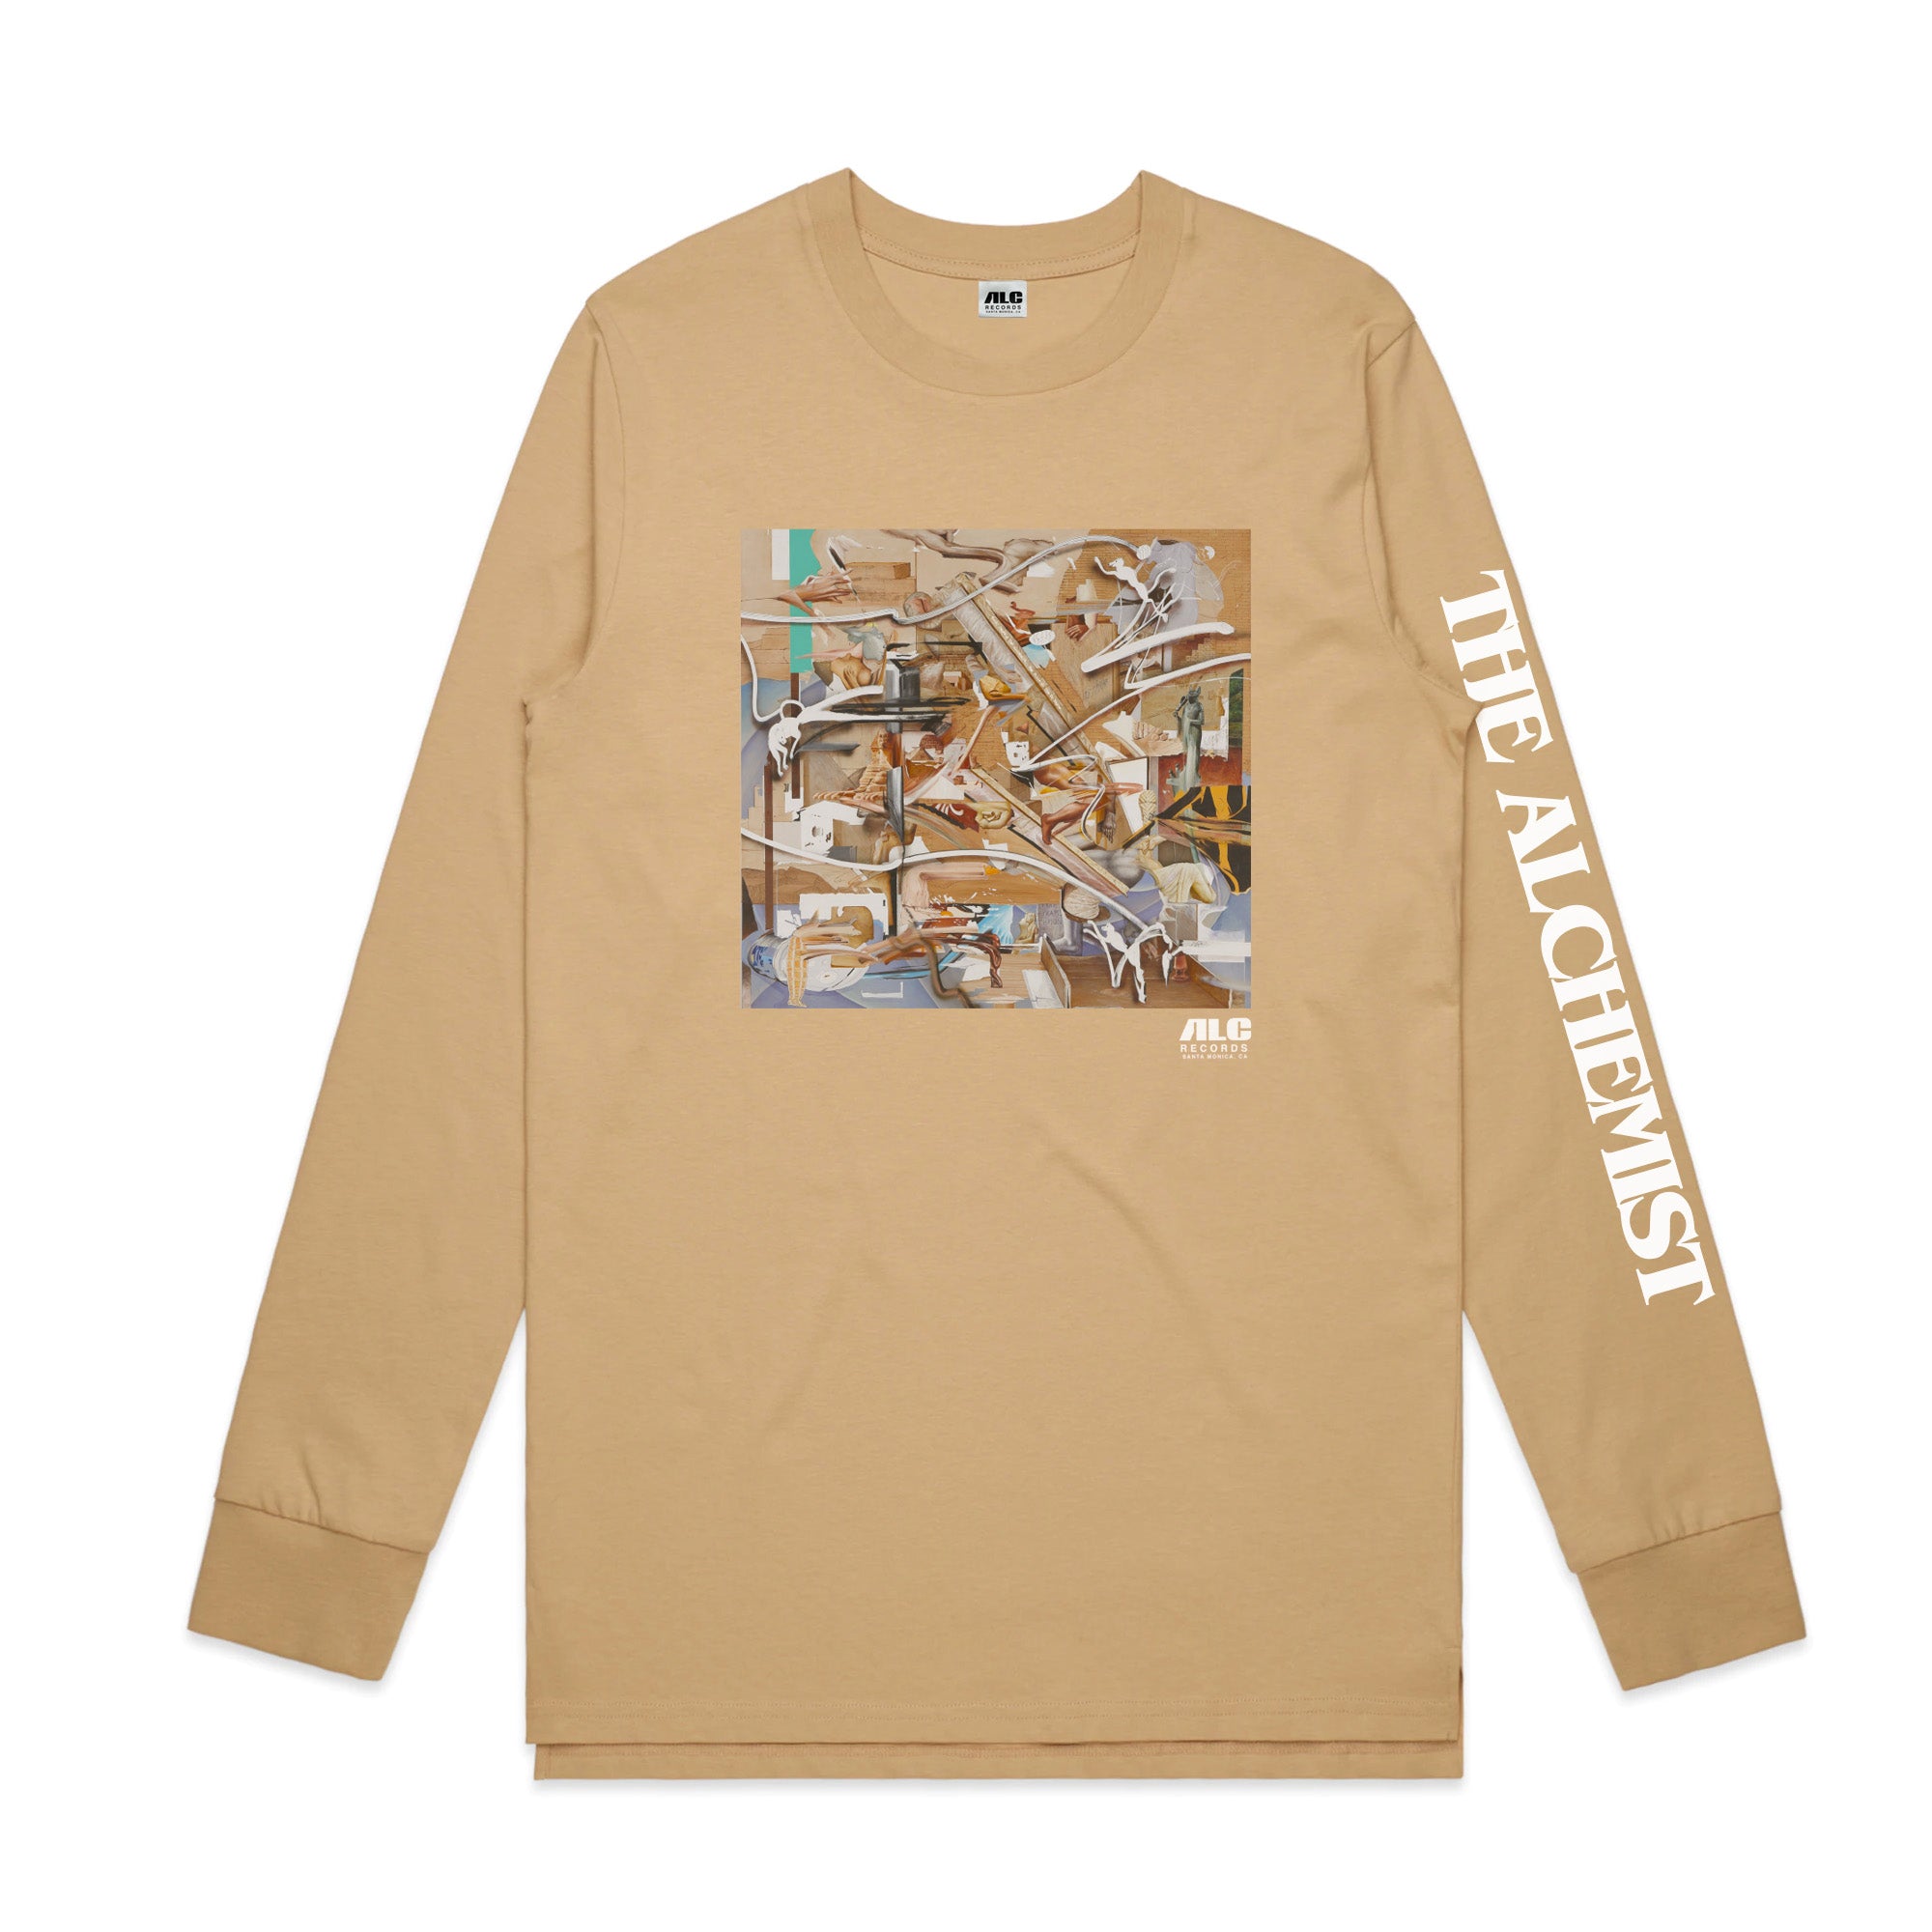 The Price Of Tea In China: Deluxe Edition (Longsleeve Tan Shirt)